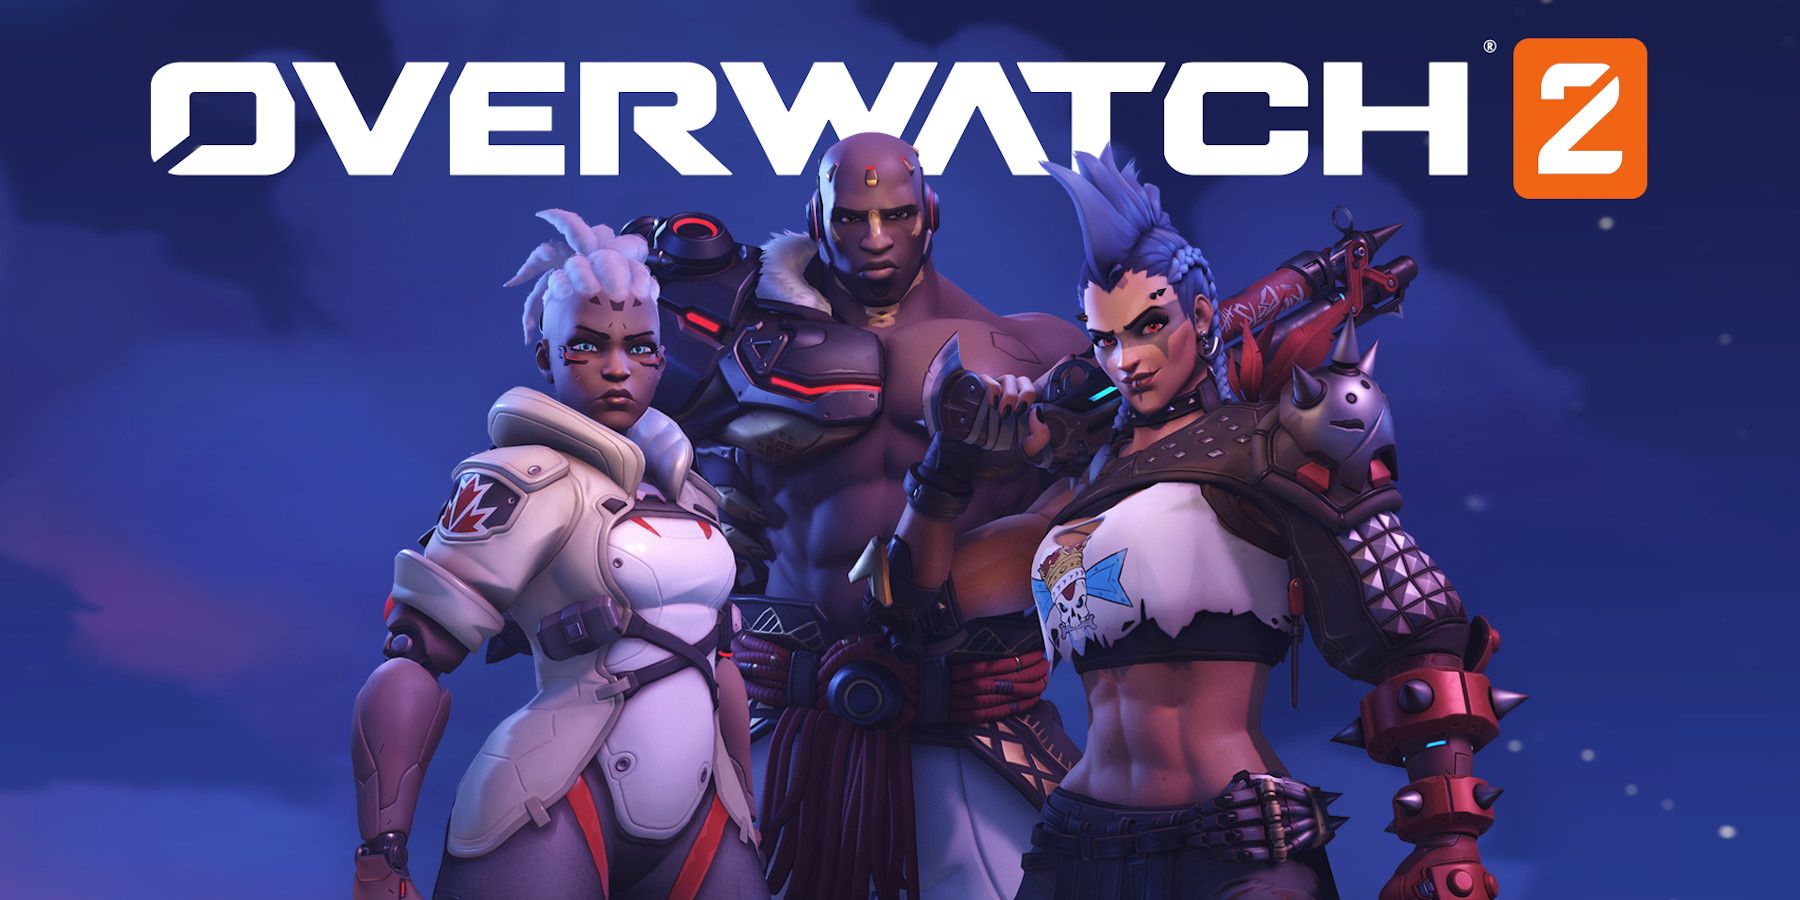 Overwatch 2 Guide – How to Play As Baptiste, Bastion, Doomfist and